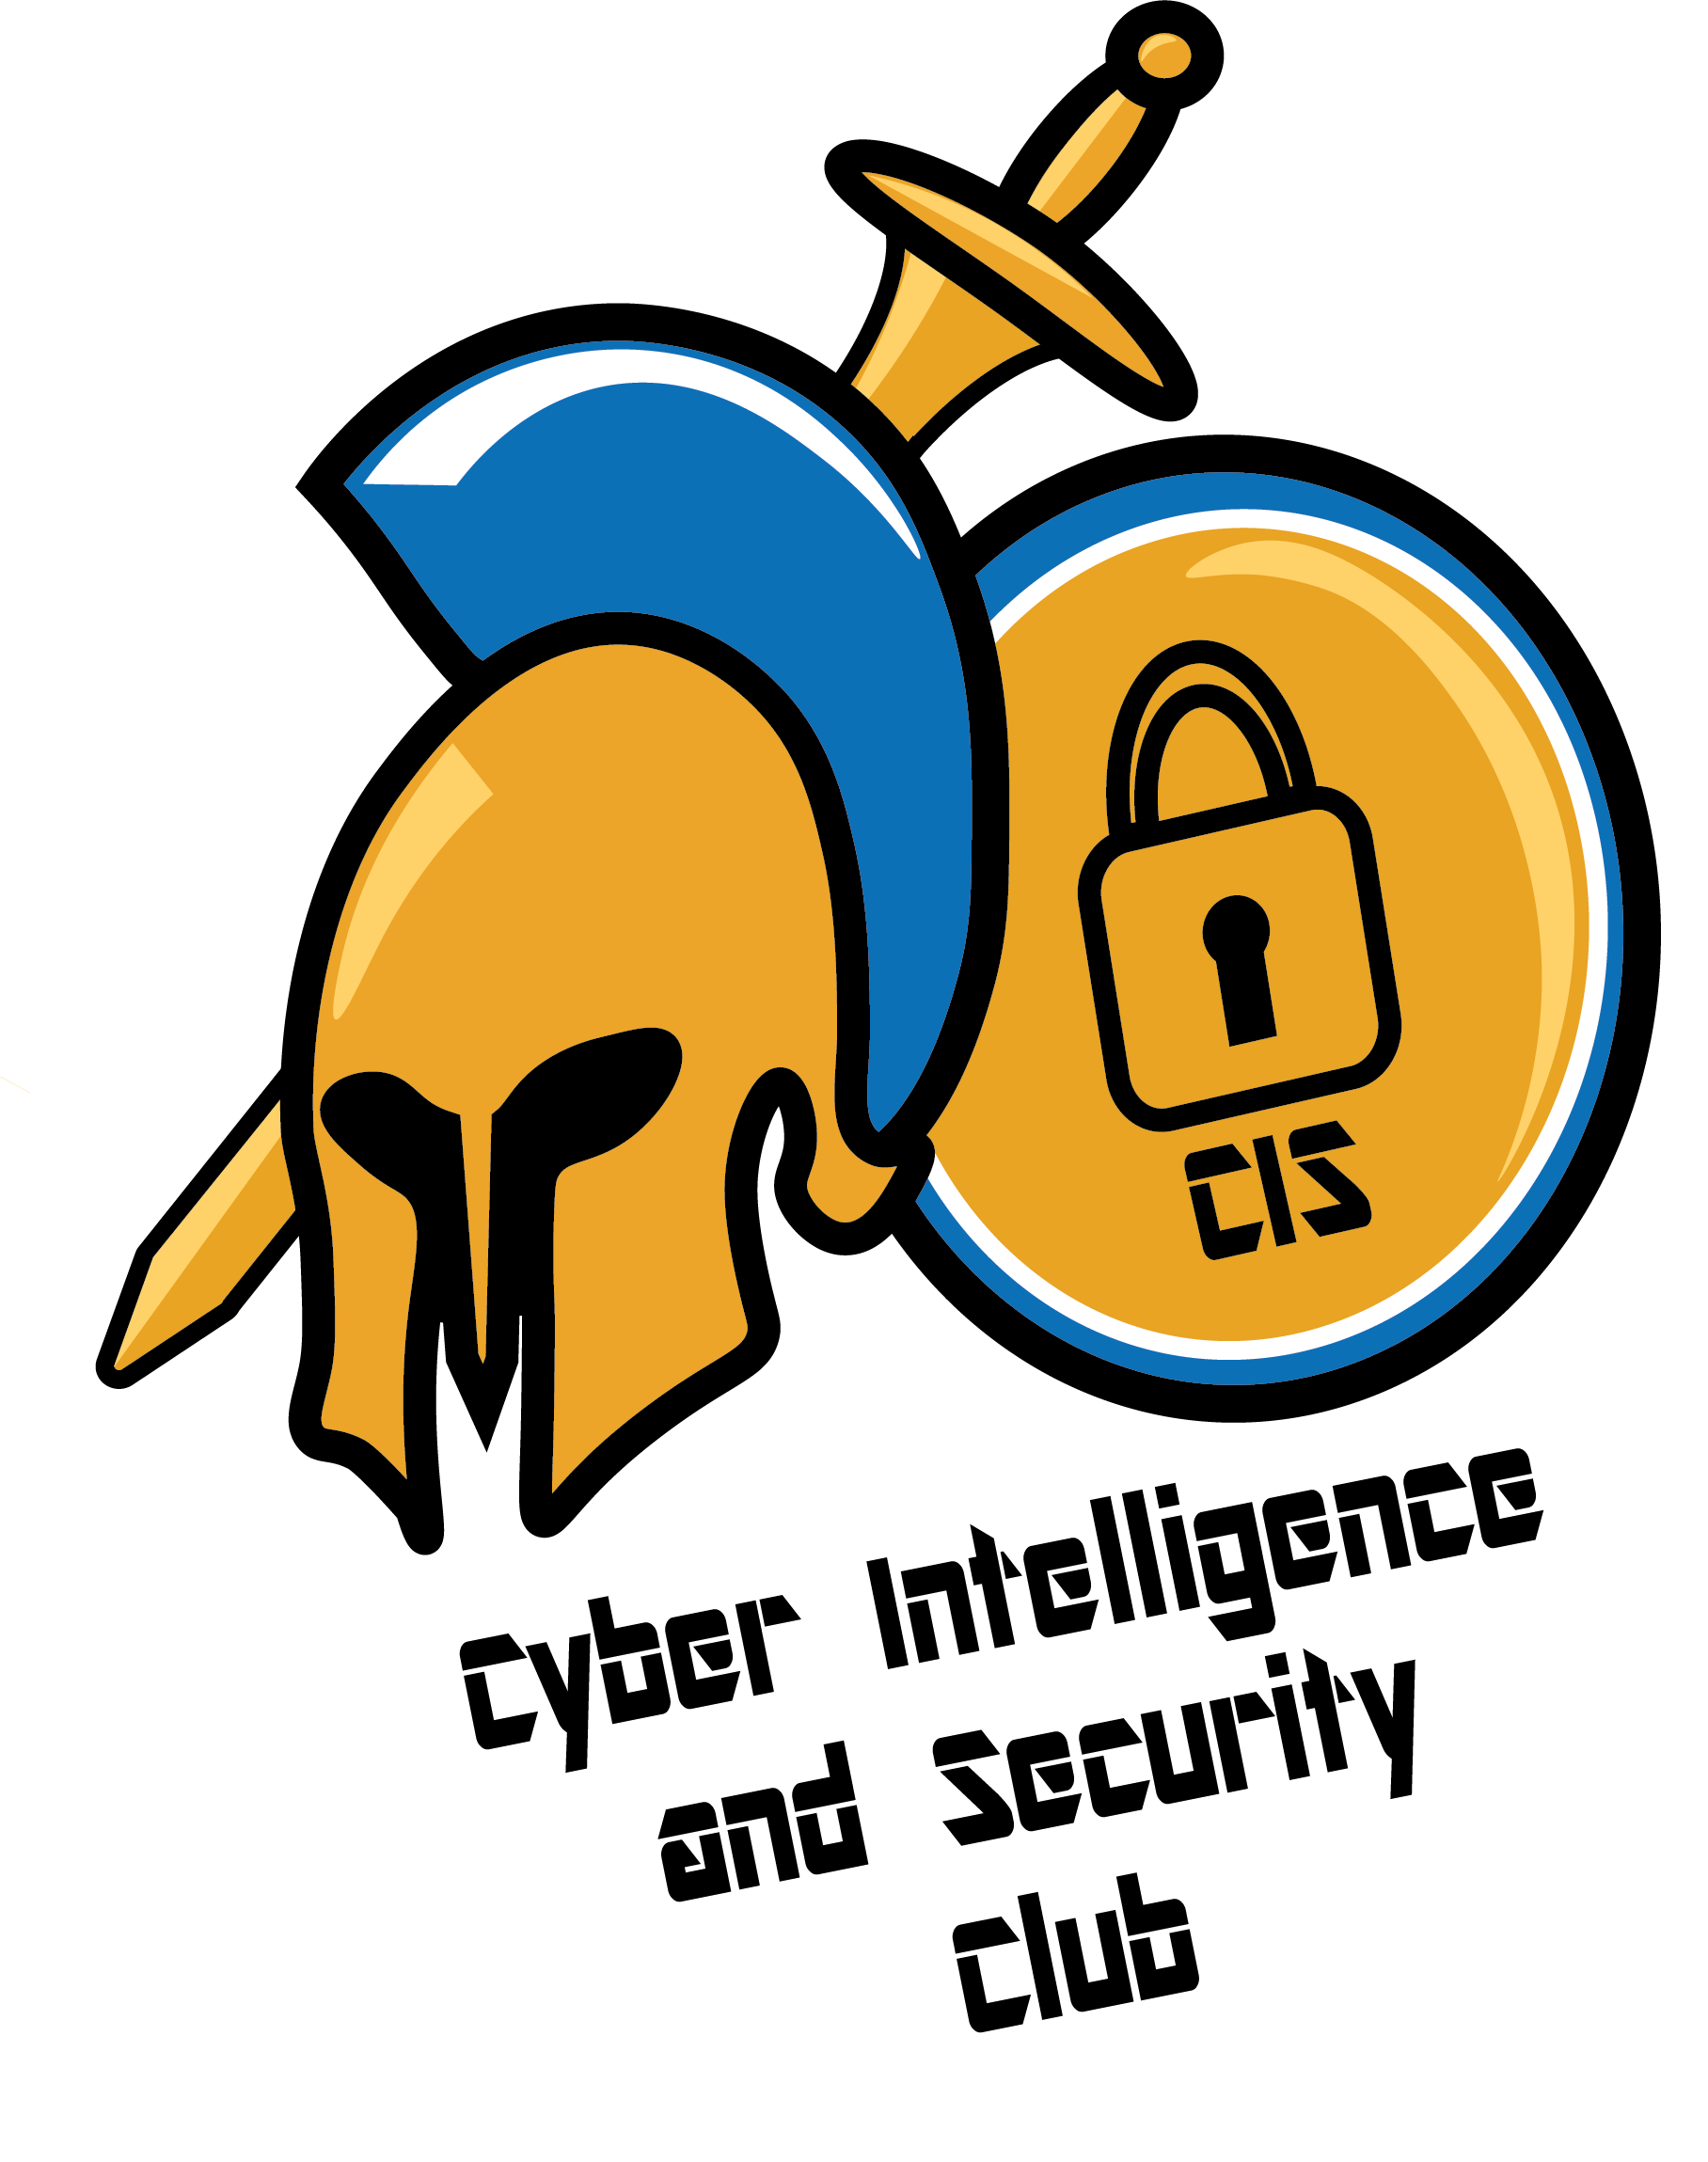 CIS club logo. Blue and yellow SJSU Mascot with sword and shield that says "CIS". Text says Cyber Intelligence and Security Club. Designed by Melanie Ballesteros.